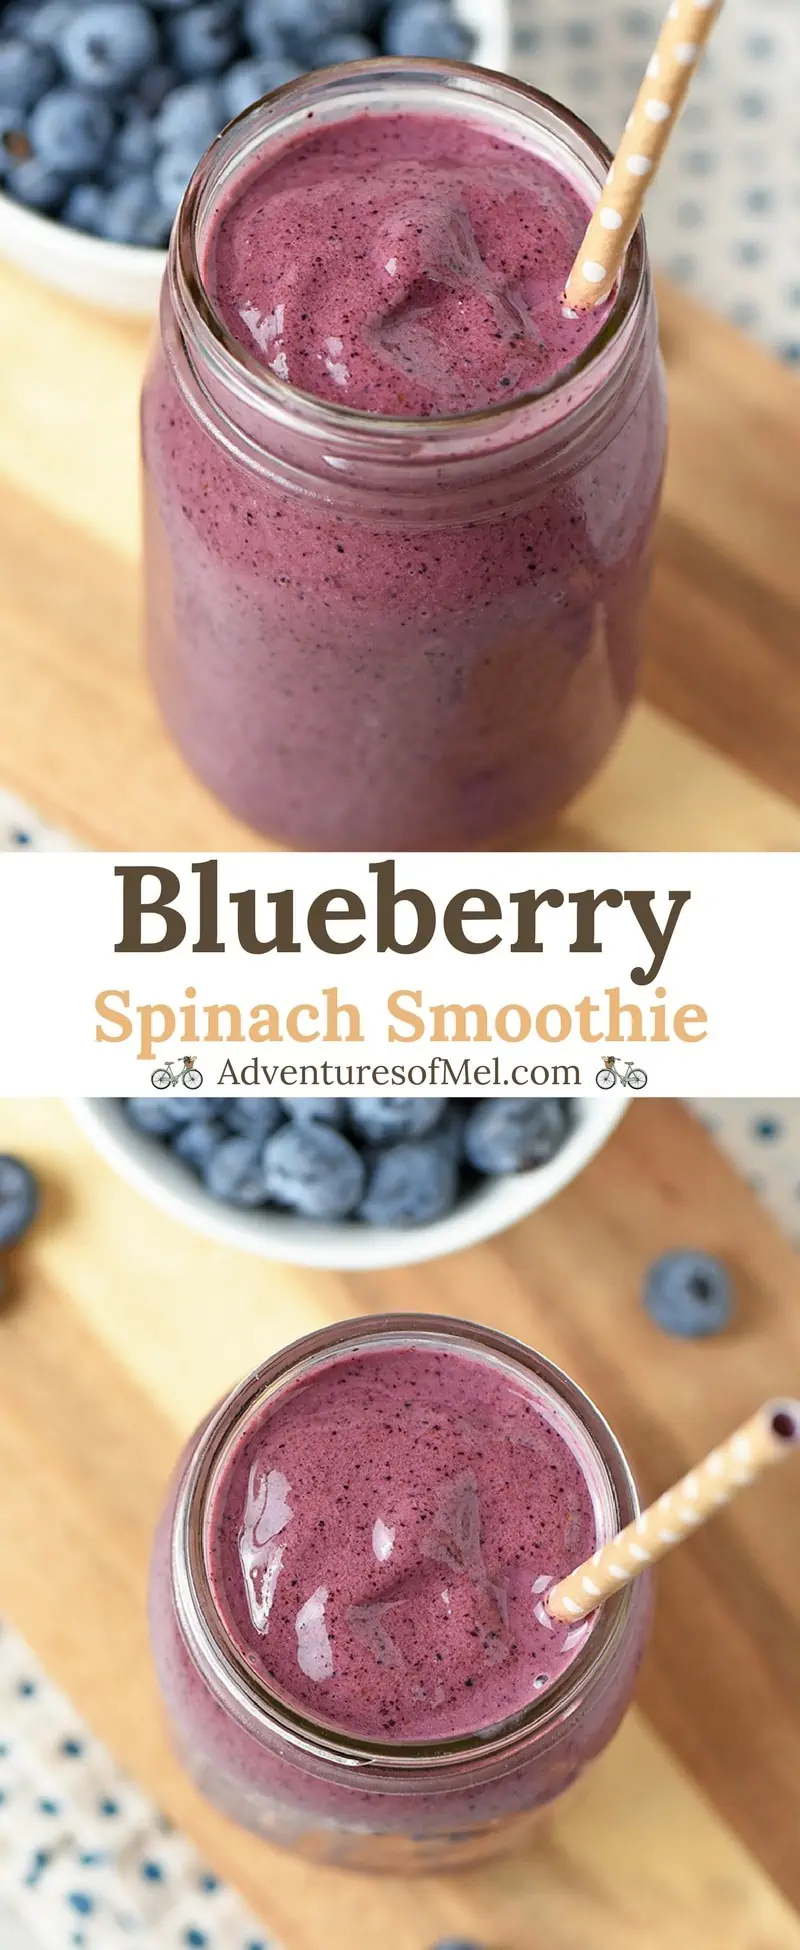 Recipe for Blueberry Spinach Smoothie